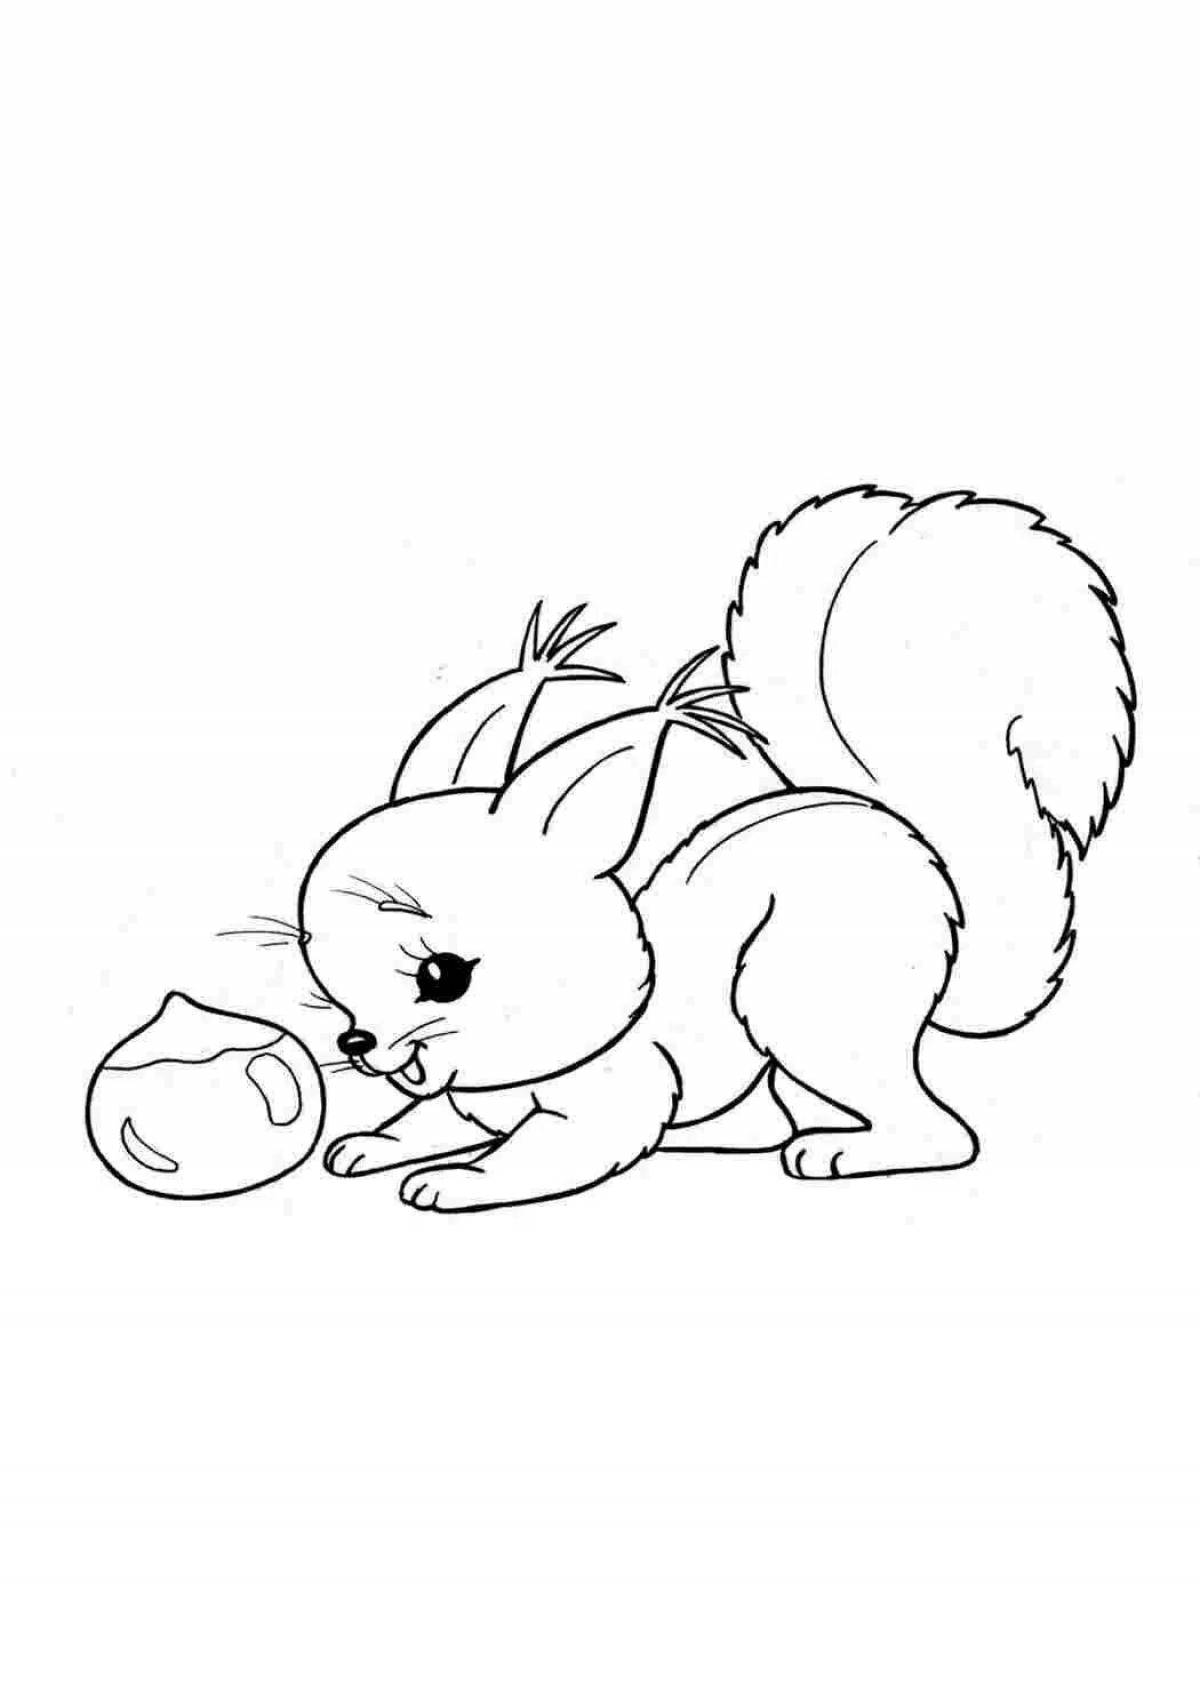 Cute rabbit and squirrel coloring book